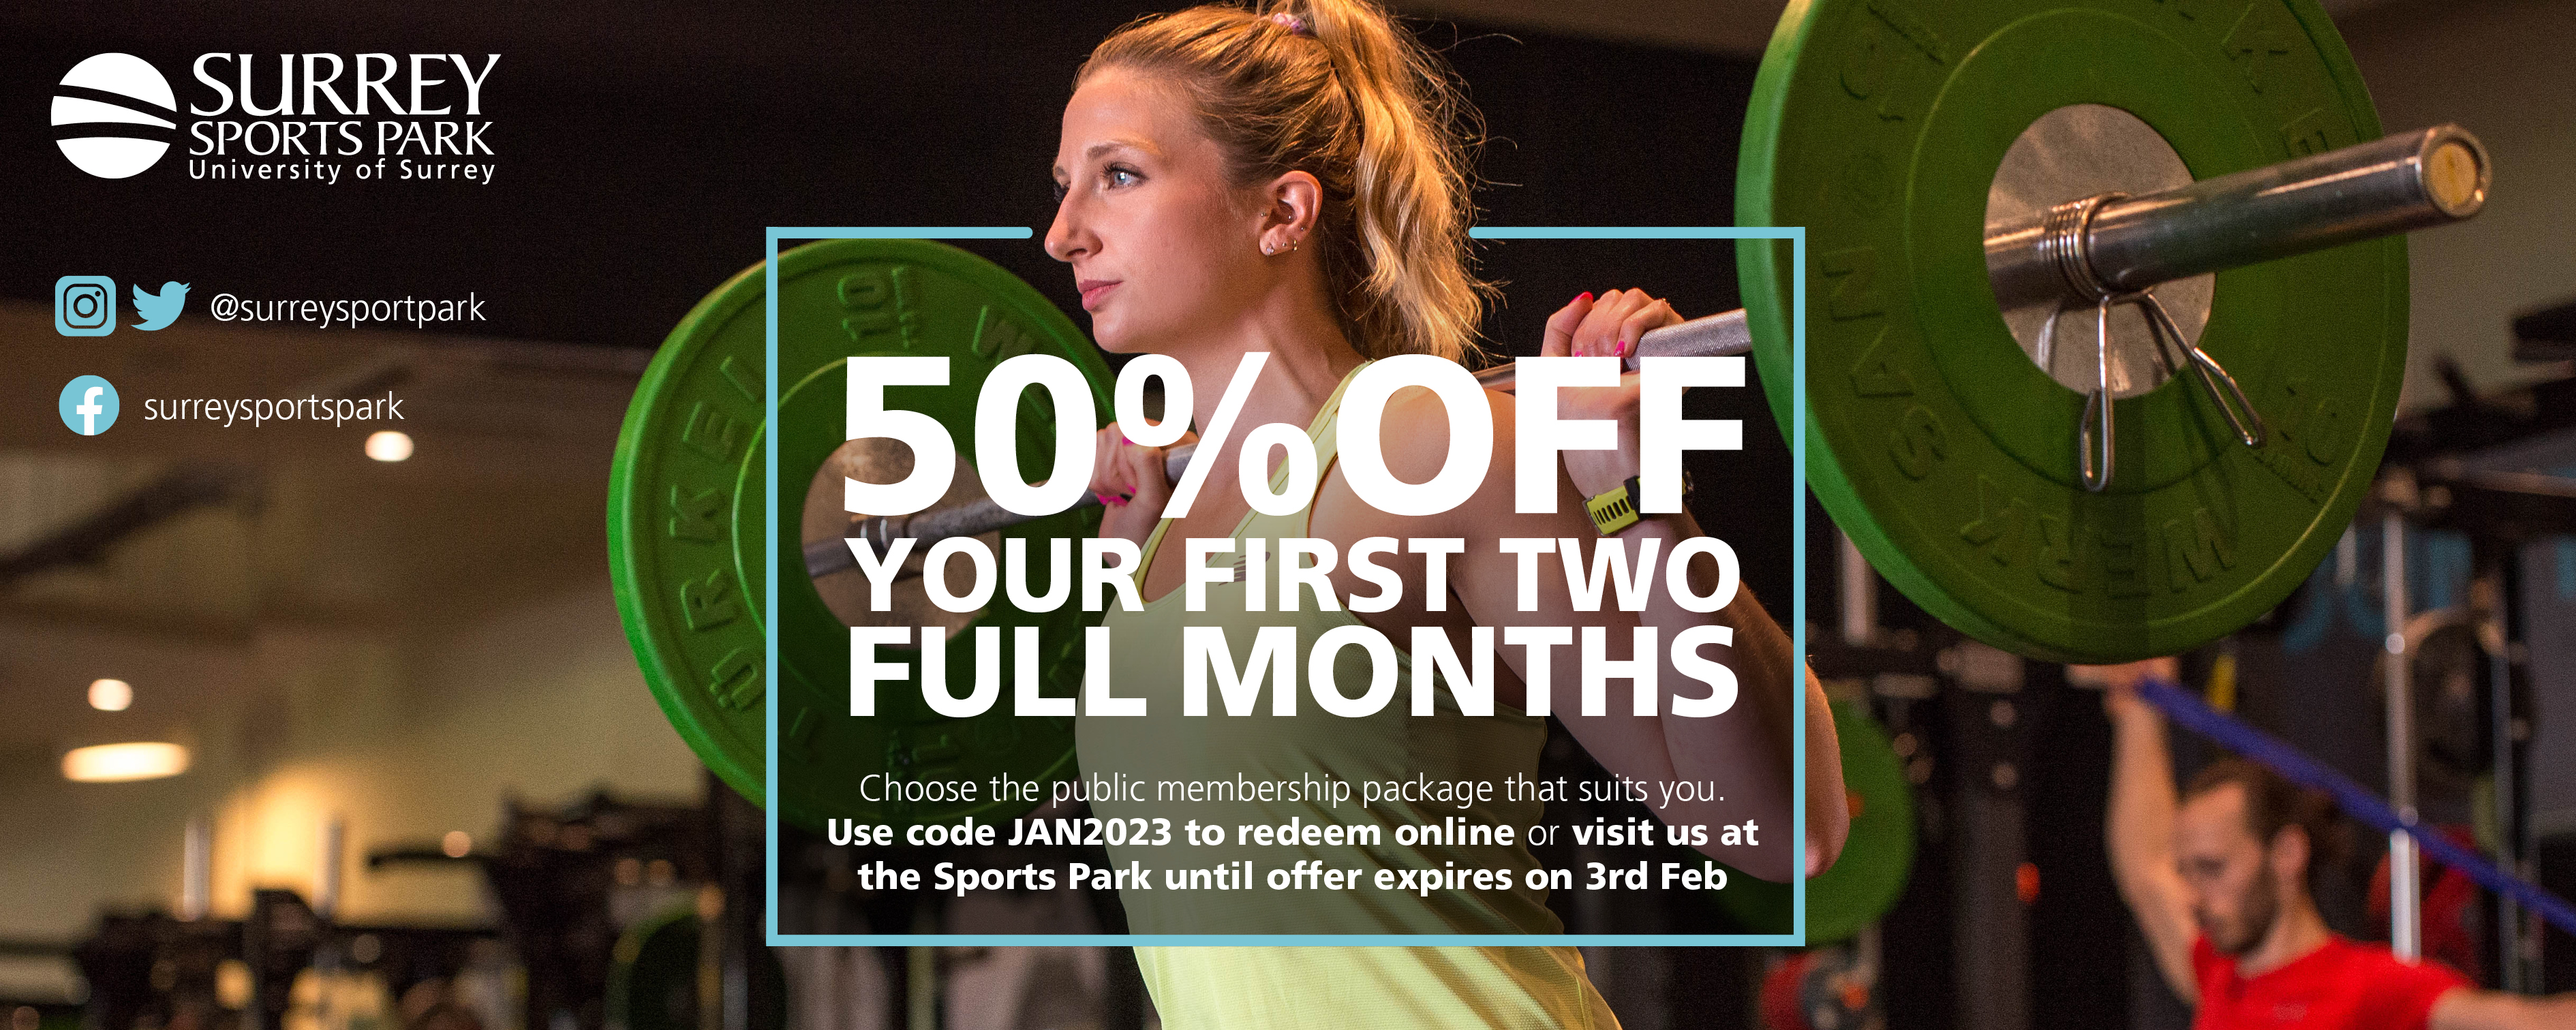 Get 50% off your first two full months of membership!